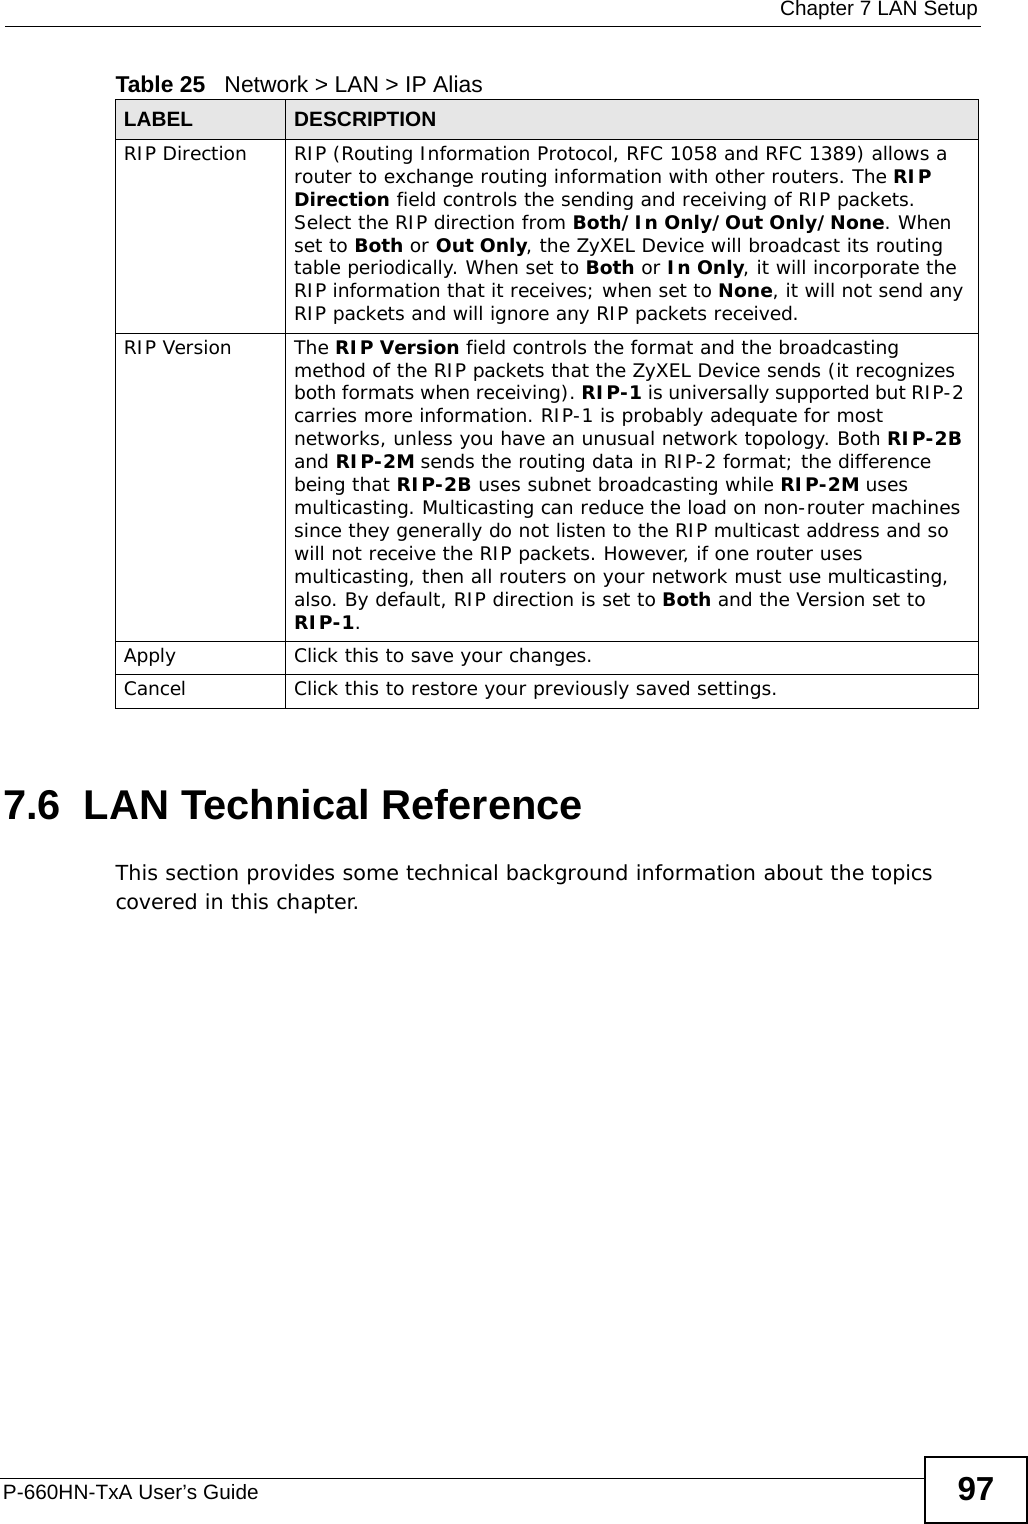  Chapter 7 LAN SetupP-660HN-TxA User’s Guide 977.6  LAN Technical ReferenceThis section provides some technical background information about the topics covered in this chapter.RIP Direction RIP (Routing Information Protocol, RFC 1058 and RFC 1389) allows a router to exchange routing information with other routers. The RIP Direction field controls the sending and receiving of RIP packets. Select the RIP direction from Both/In Only/Out Only/None. When set to Both or Out Only, the ZyXEL Device will broadcast its routing table periodically. When set to Both or In Only, it will incorporate the RIP information that it receives; when set to None, it will not send any RIP packets and will ignore any RIP packets received.RIP Version The RIP Version field controls the format and the broadcasting method of the RIP packets that the ZyXEL Device sends (it recognizes both formats when receiving). RIP-1 is universally supported but RIP-2 carries more information. RIP-1 is probably adequate for most networks, unless you have an unusual network topology. Both RIP-2B and RIP-2M sends the routing data in RIP-2 format; the difference being that RIP-2B uses subnet broadcasting while RIP-2M uses multicasting. Multicasting can reduce the load on non-router machines since they generally do not listen to the RIP multicast address and so will not receive the RIP packets. However, if one router uses multicasting, then all routers on your network must use multicasting, also. By default, RIP direction is set to Both and the Version set to RIP-1.Apply Click this to save your changes.Cancel Click this to restore your previously saved settings.Table 25   Network &gt; LAN &gt; IP Alias LABEL DESCRIPTION